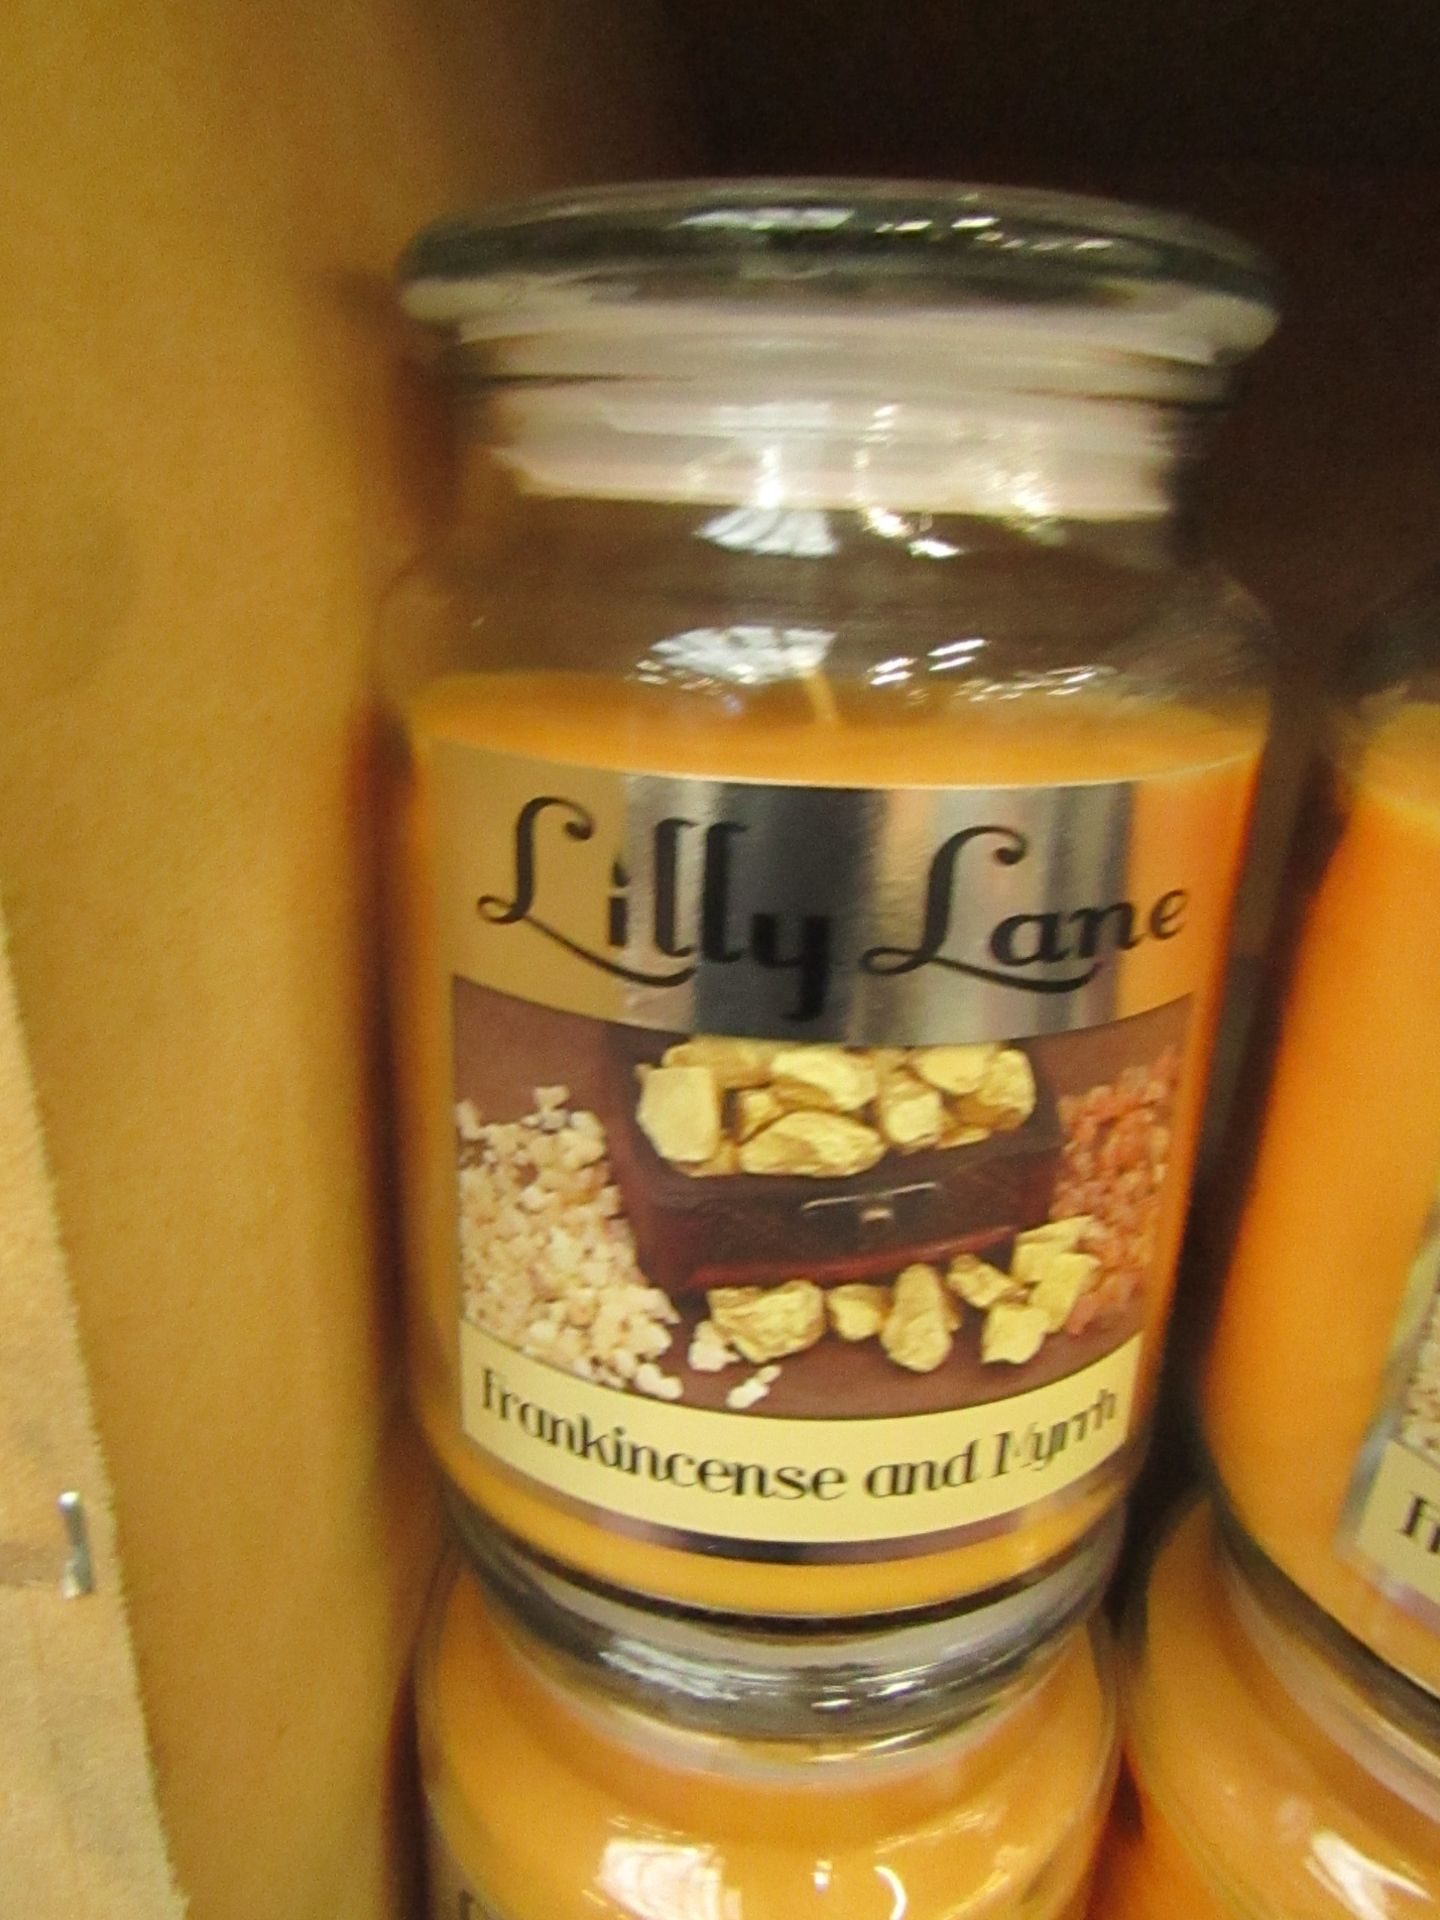 Lilly Lane - Frankincense & Myrrh Scented Candle, new.